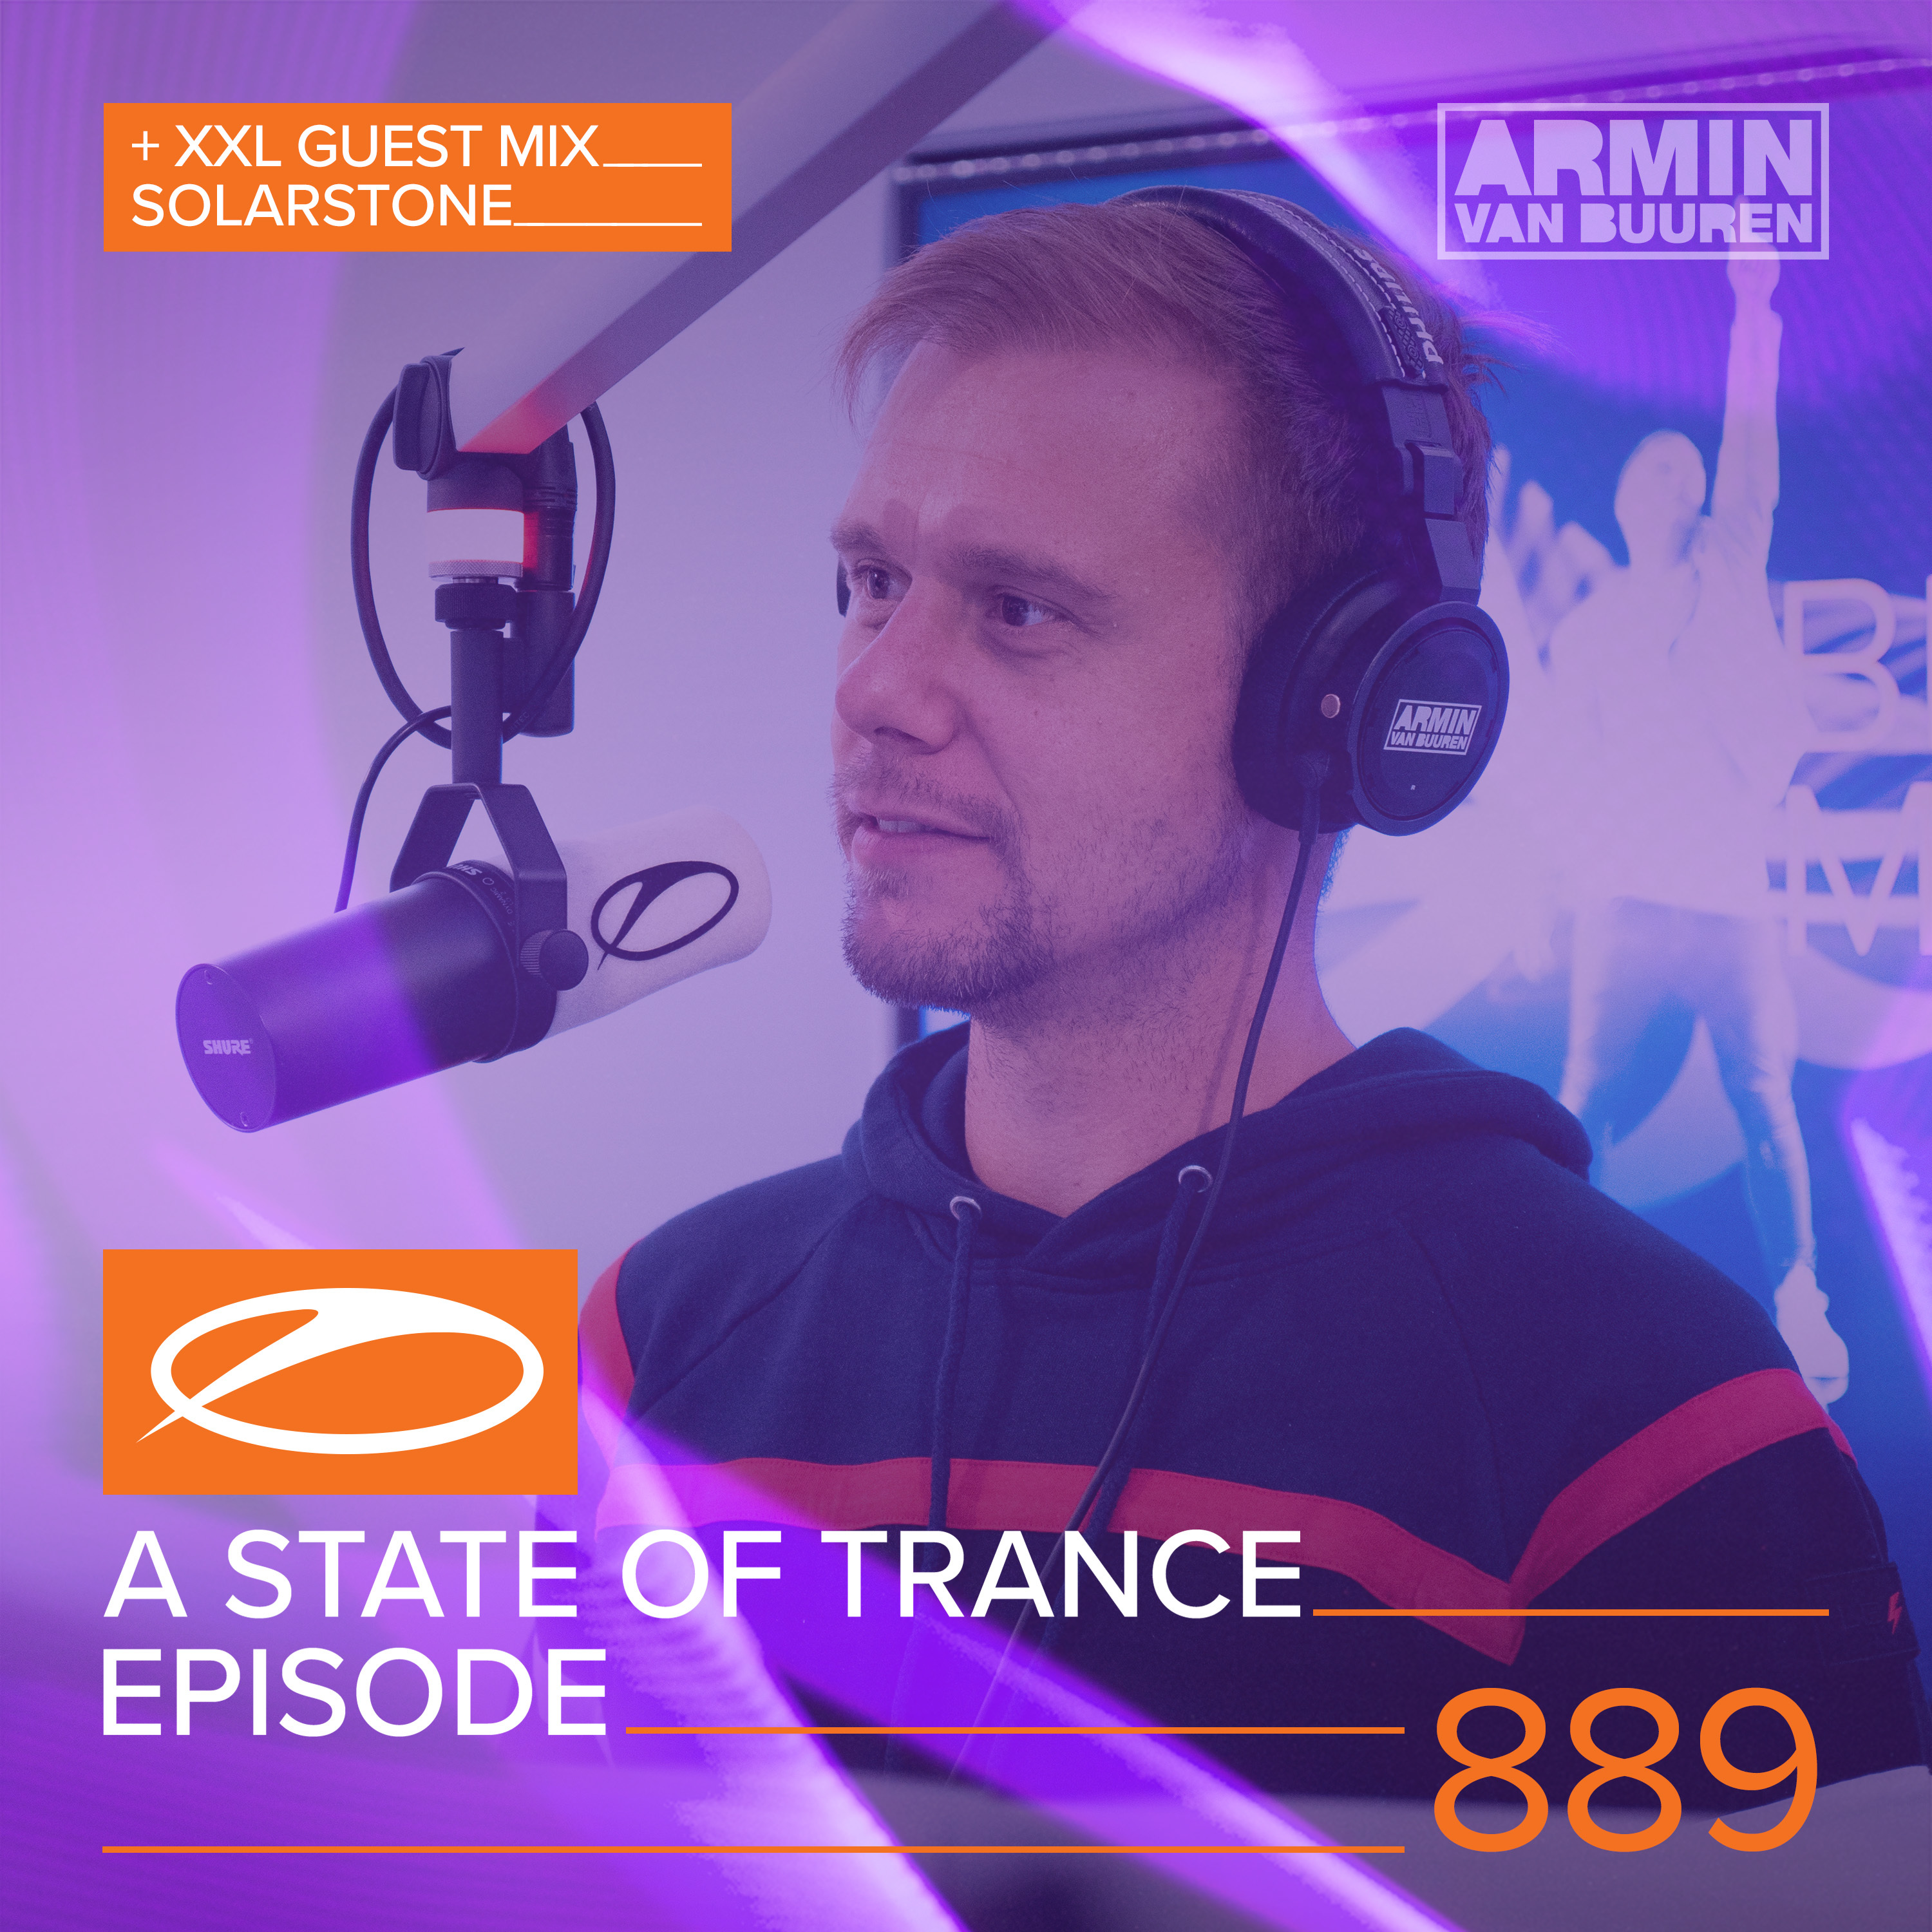 The Only One (ASOT 889)